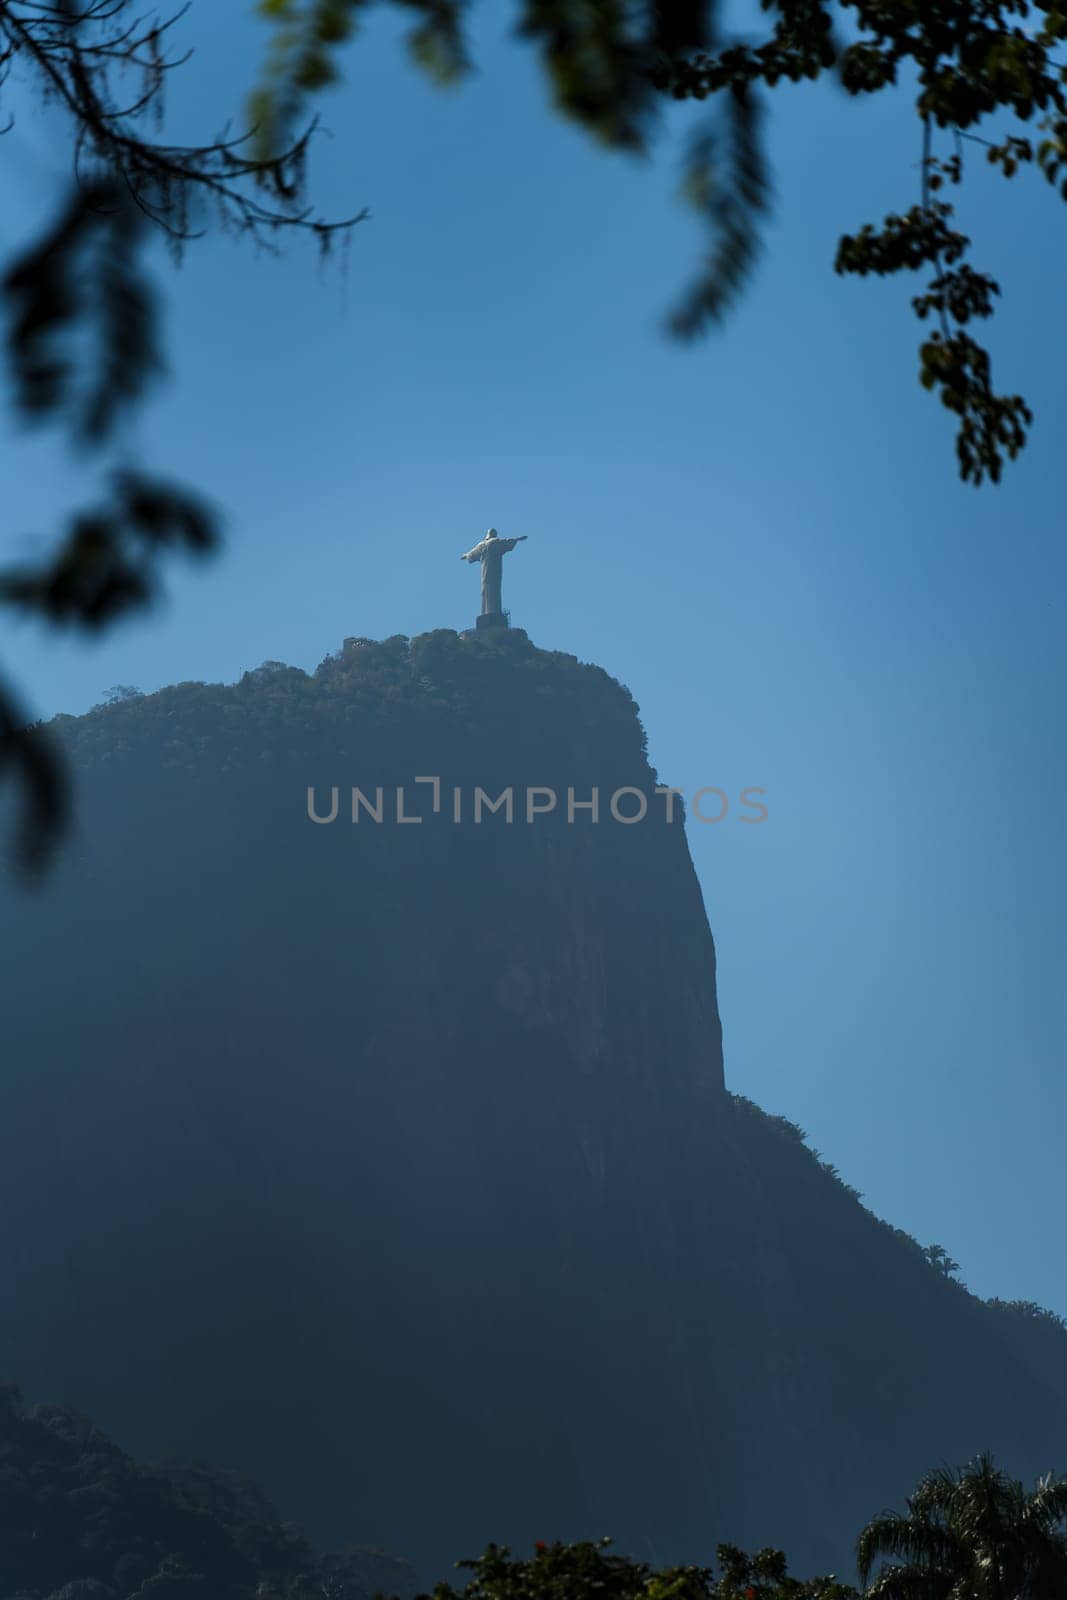 Distant View of Christ the Redeemer and Mountain Silhouette under Blue Sky by FerradalFCG